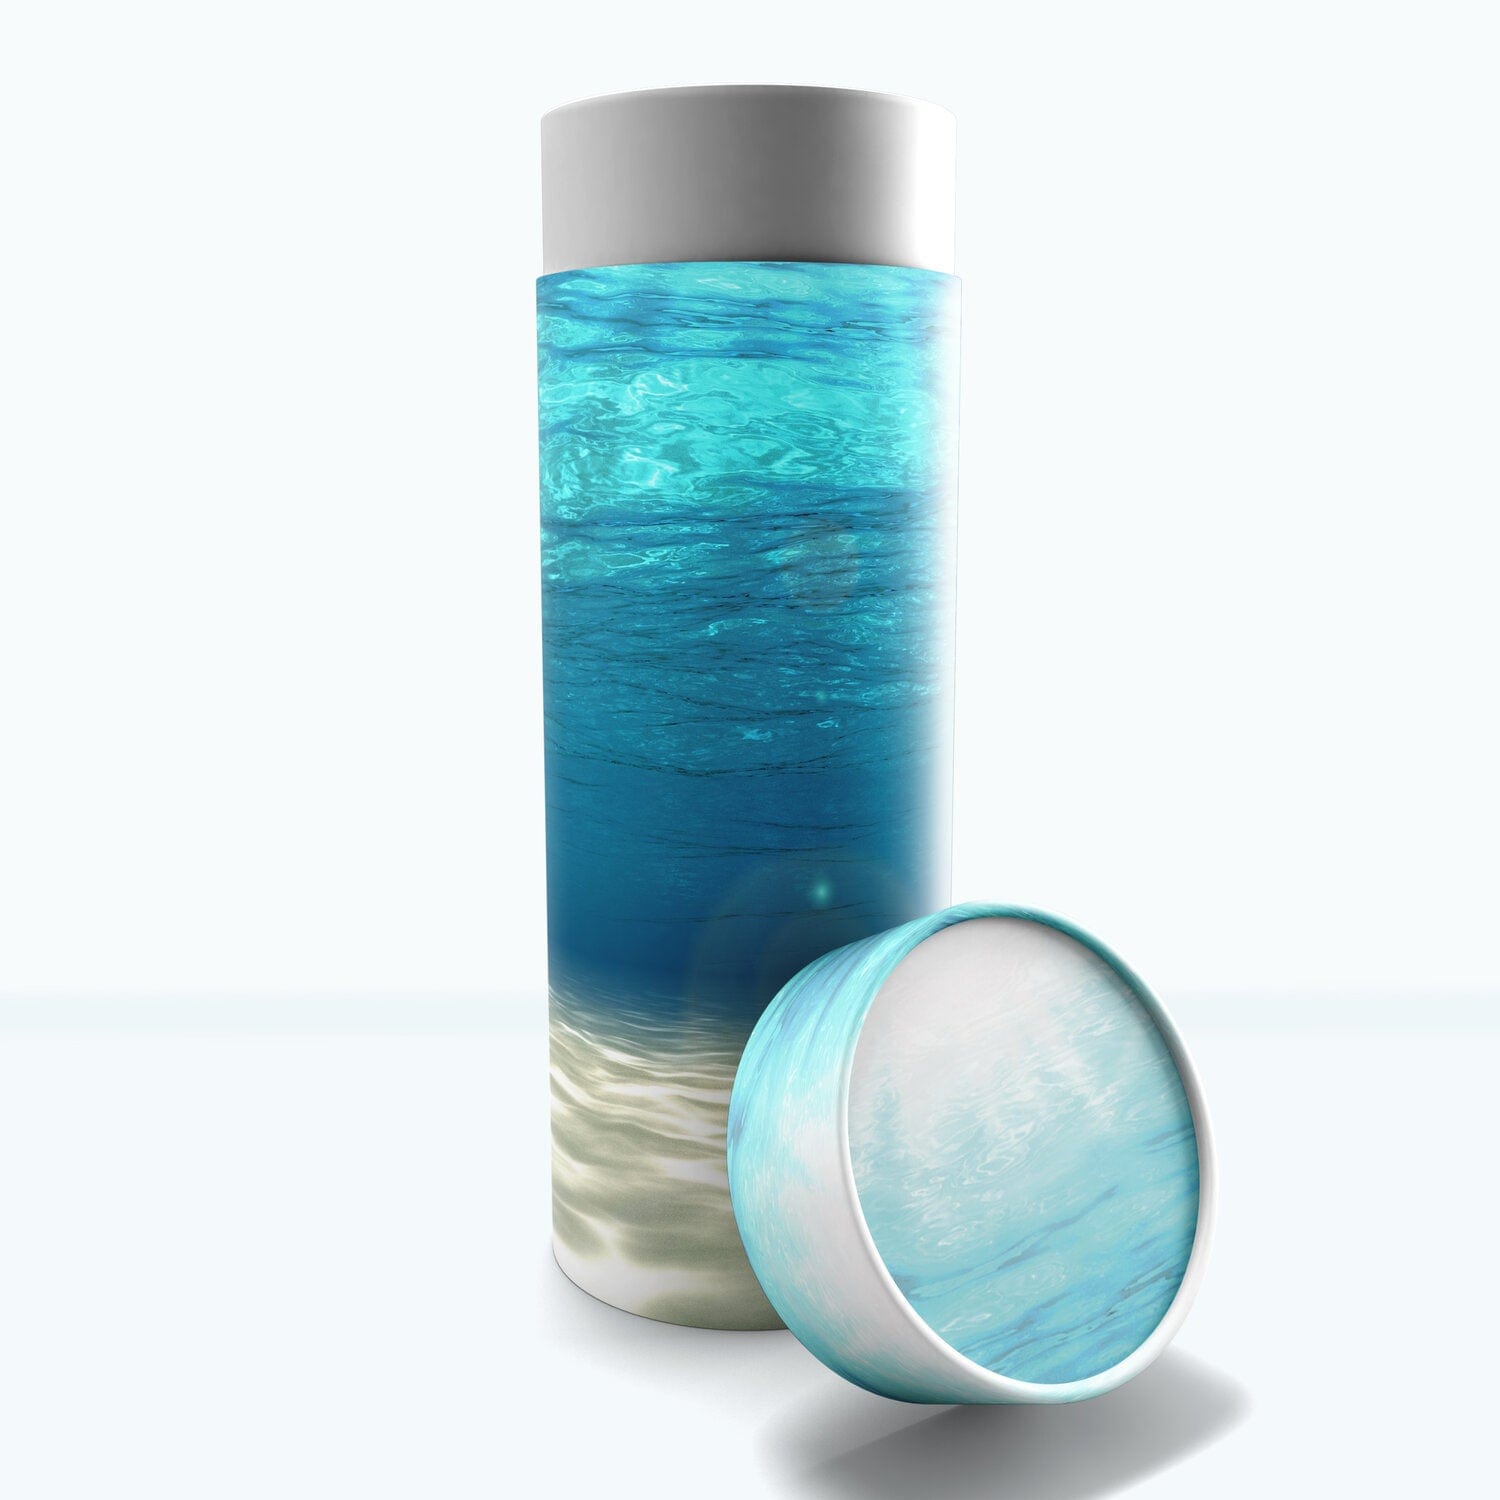 Tayyab01 Small Oceanic - Biodegradable & Eco Friendly Burial or Scattering Urn / Tube